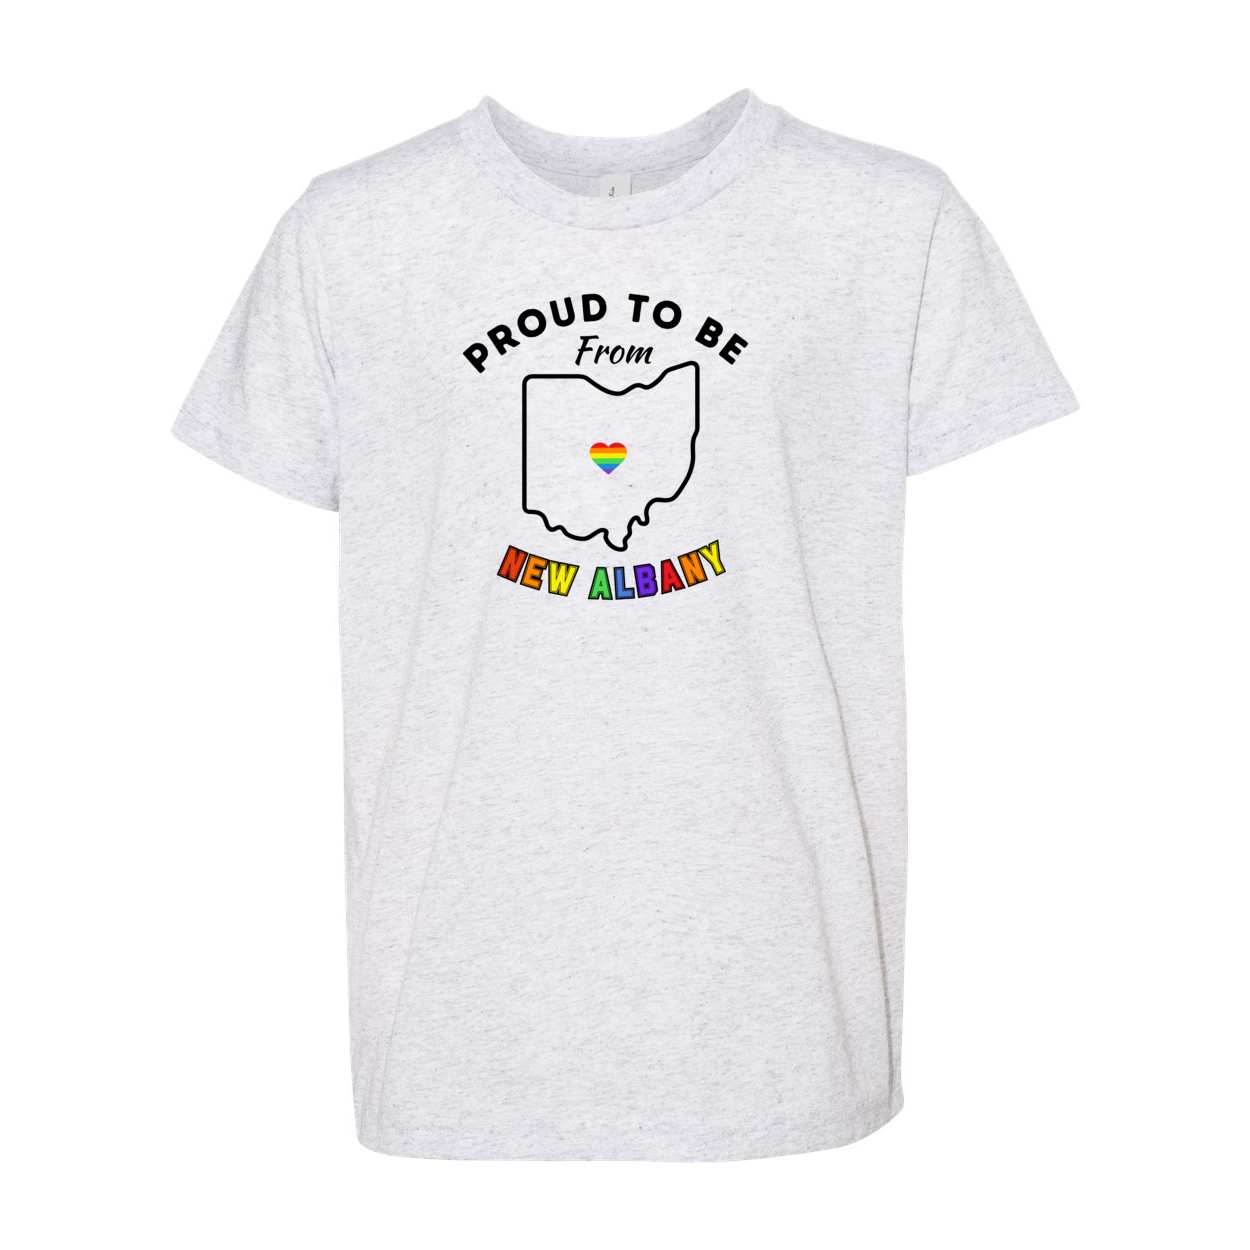 Youth City Rainbow Pride Super Soft Short Sleeve Graphic Tee - New Albany